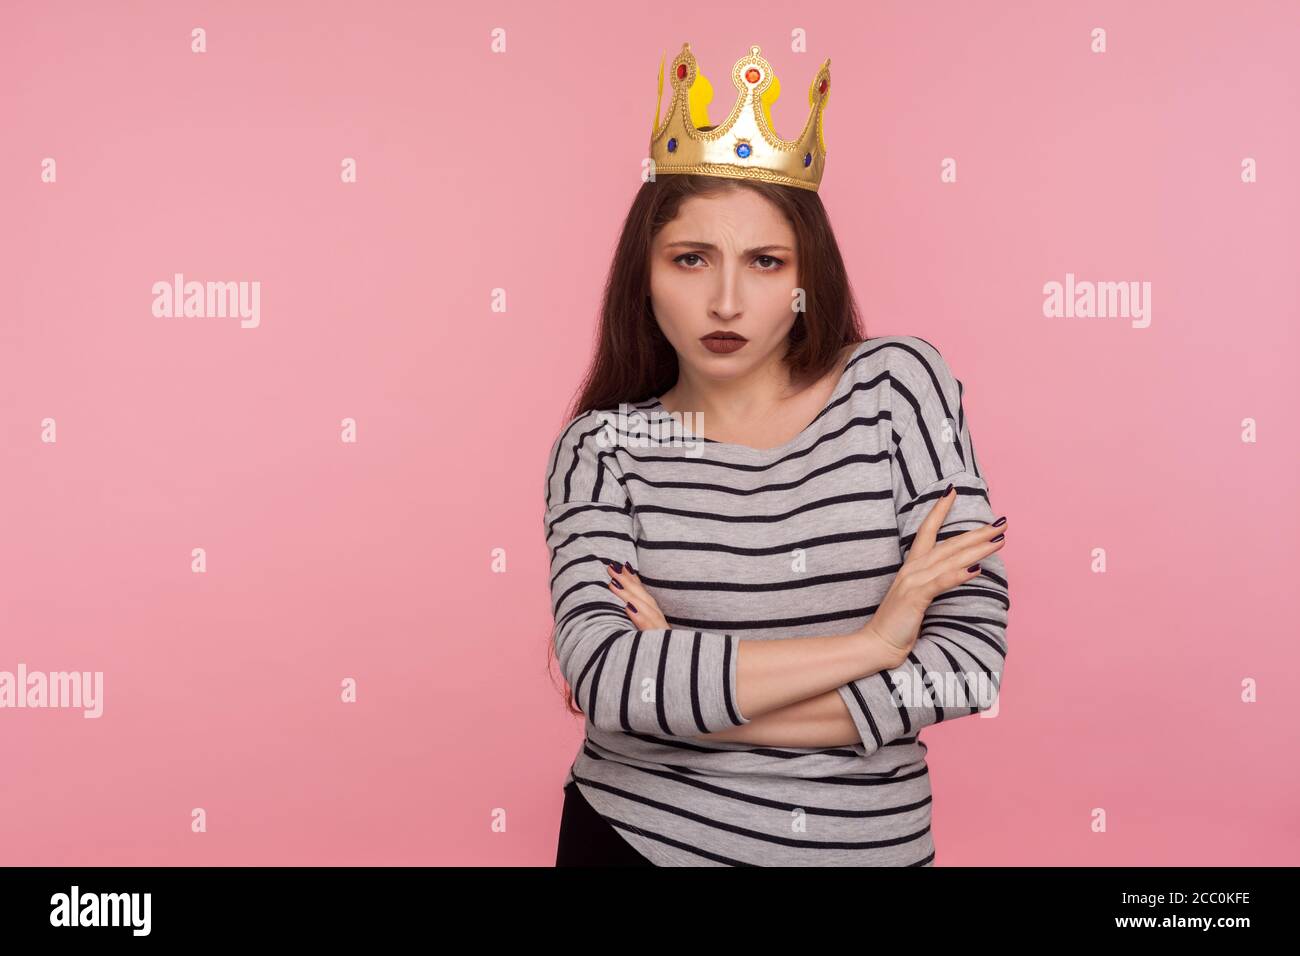 I'm queen! Portrait of egoistic haughty woman with golden crown on head crossing hands and looking with arrogance, her look expressing confidence, sup Stock Photo